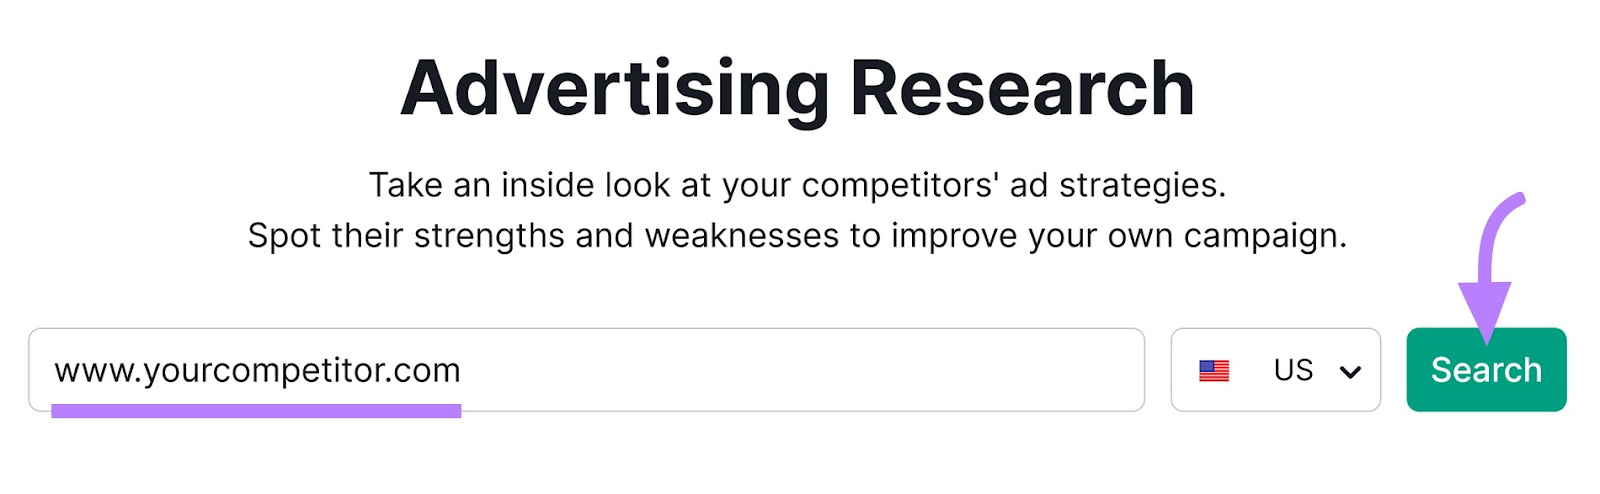 enter a competitor’s domain in Advertising Research tool